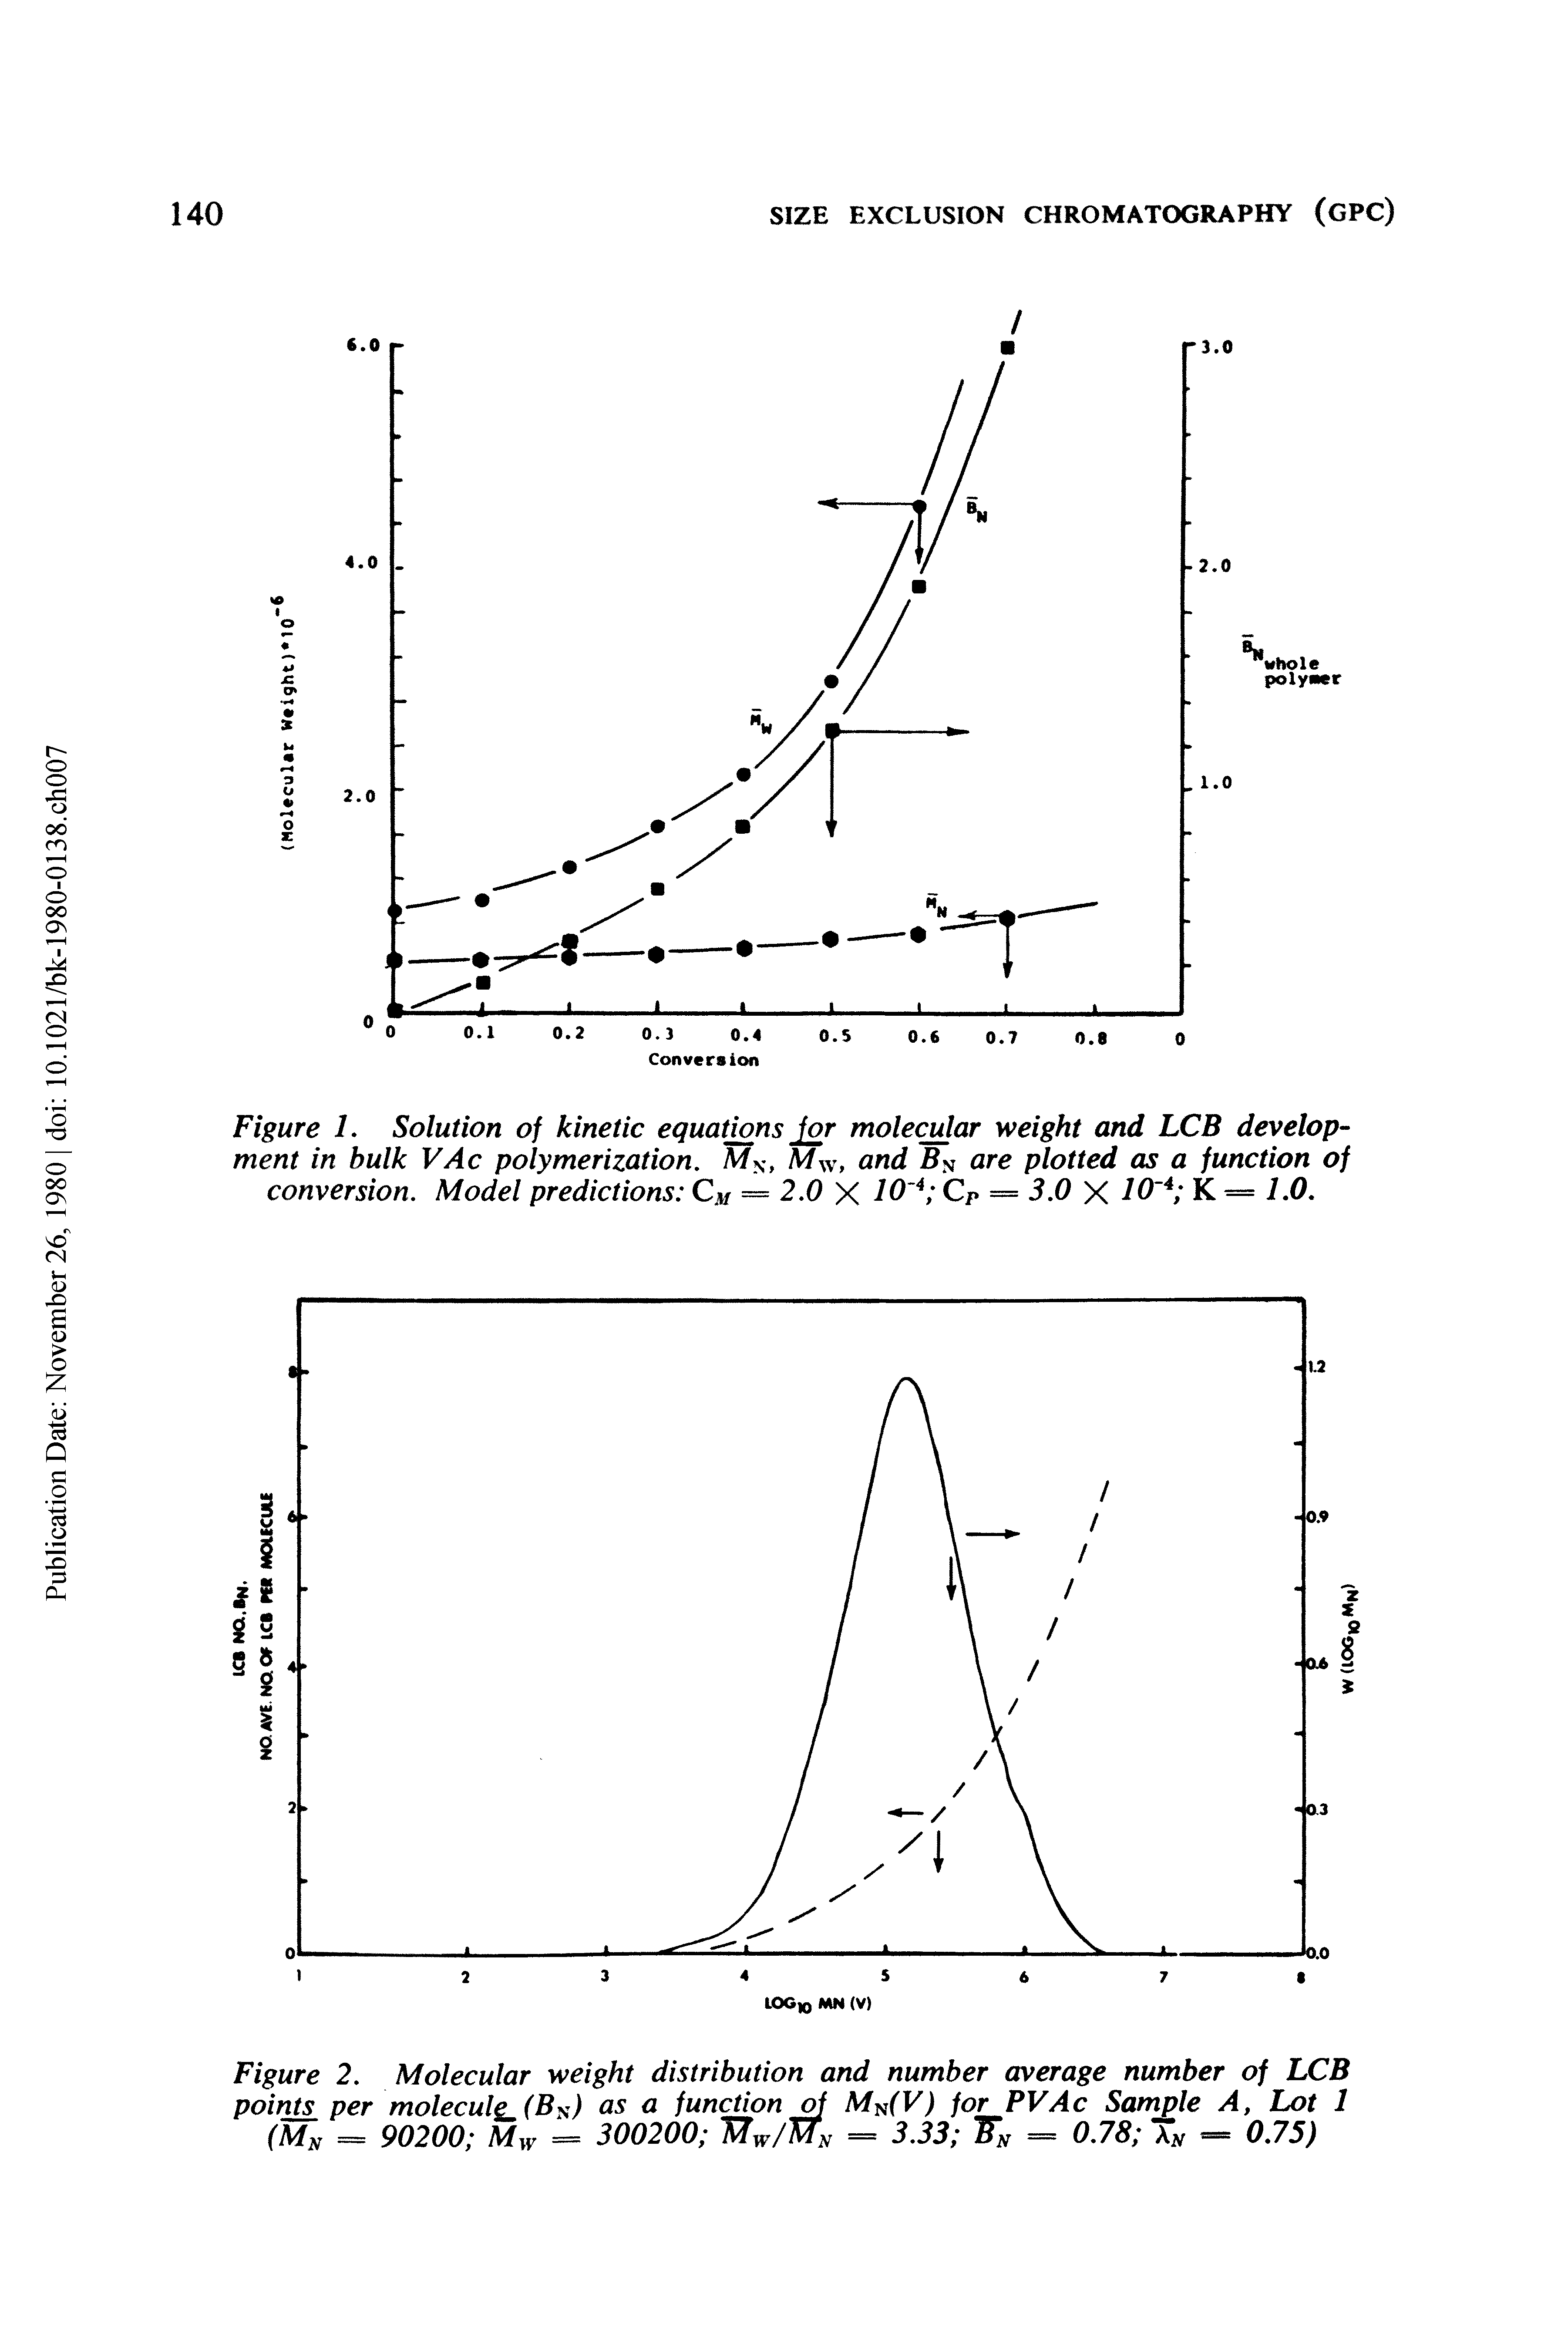 Figure L Solution of kinetic equations for molecjdar weight and LCB development in bulk VAc polymerization. Ms, Mw, and Bs are plotted as a function of conversion. Model predictions Cm = 2.0 X Cp = 3.0 X i0 K == 1.0.